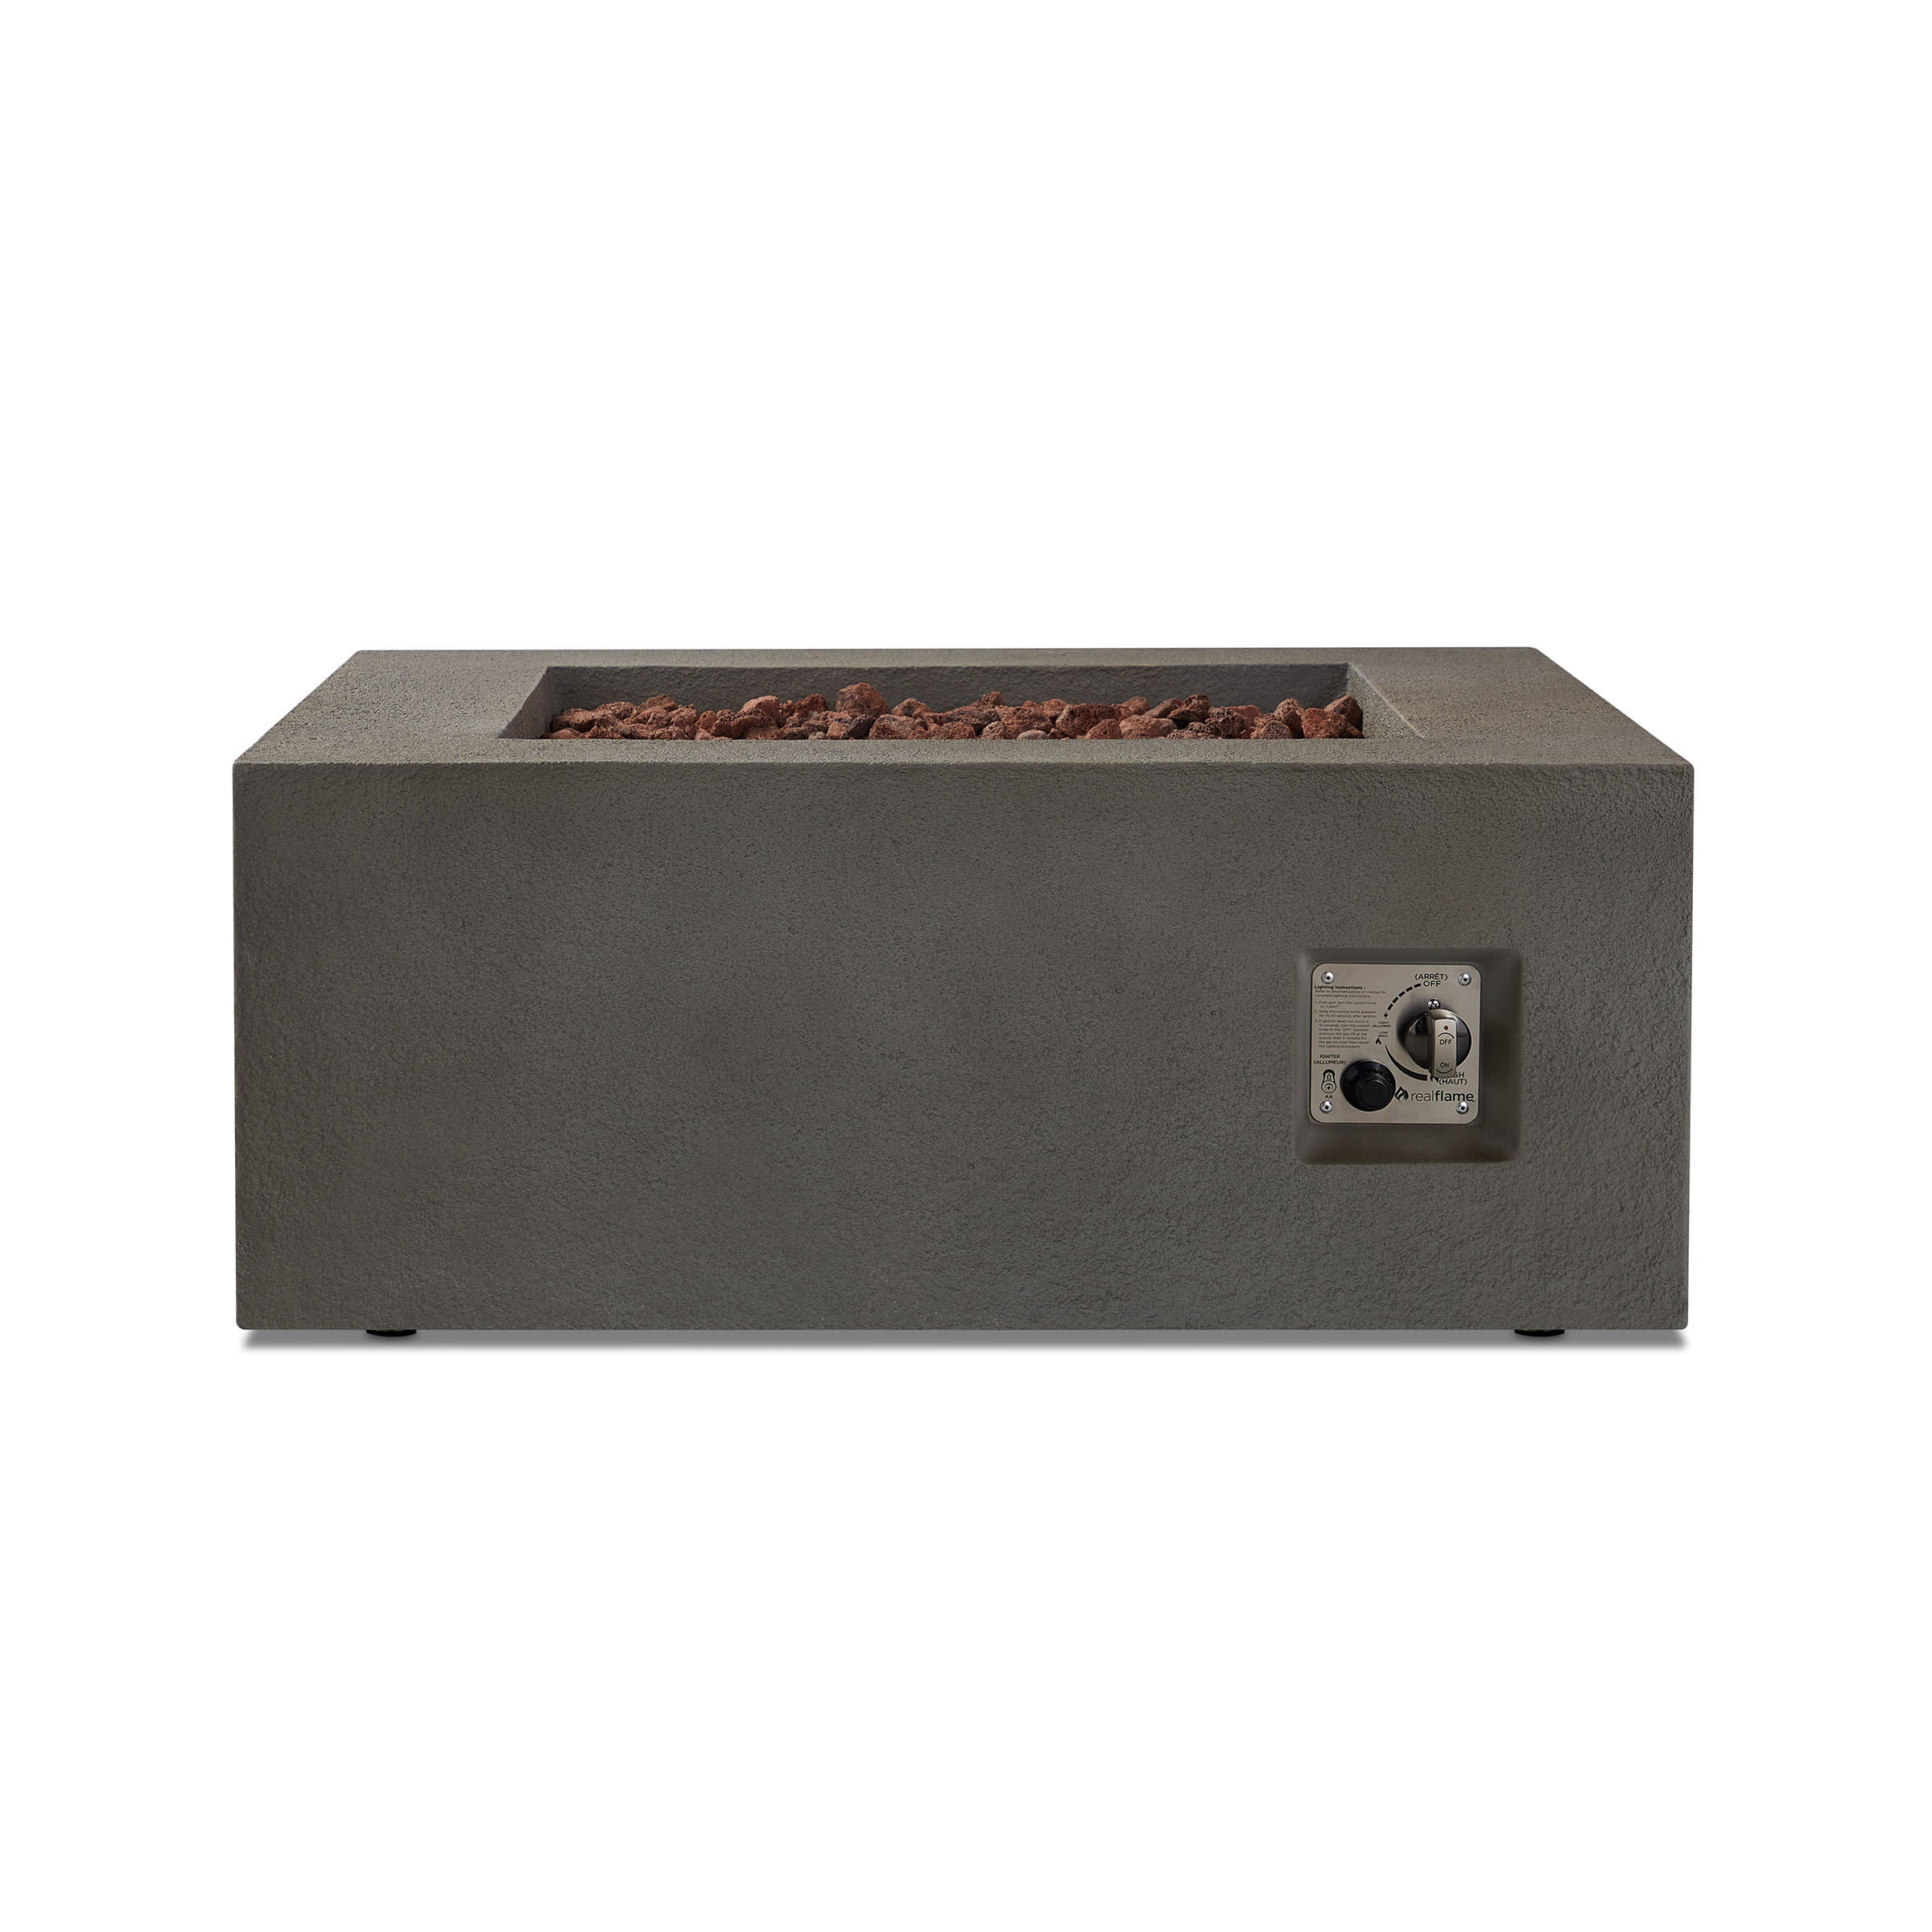 Real Flame 9720lp Glg Glacier Gray, Halsted Fire Pit